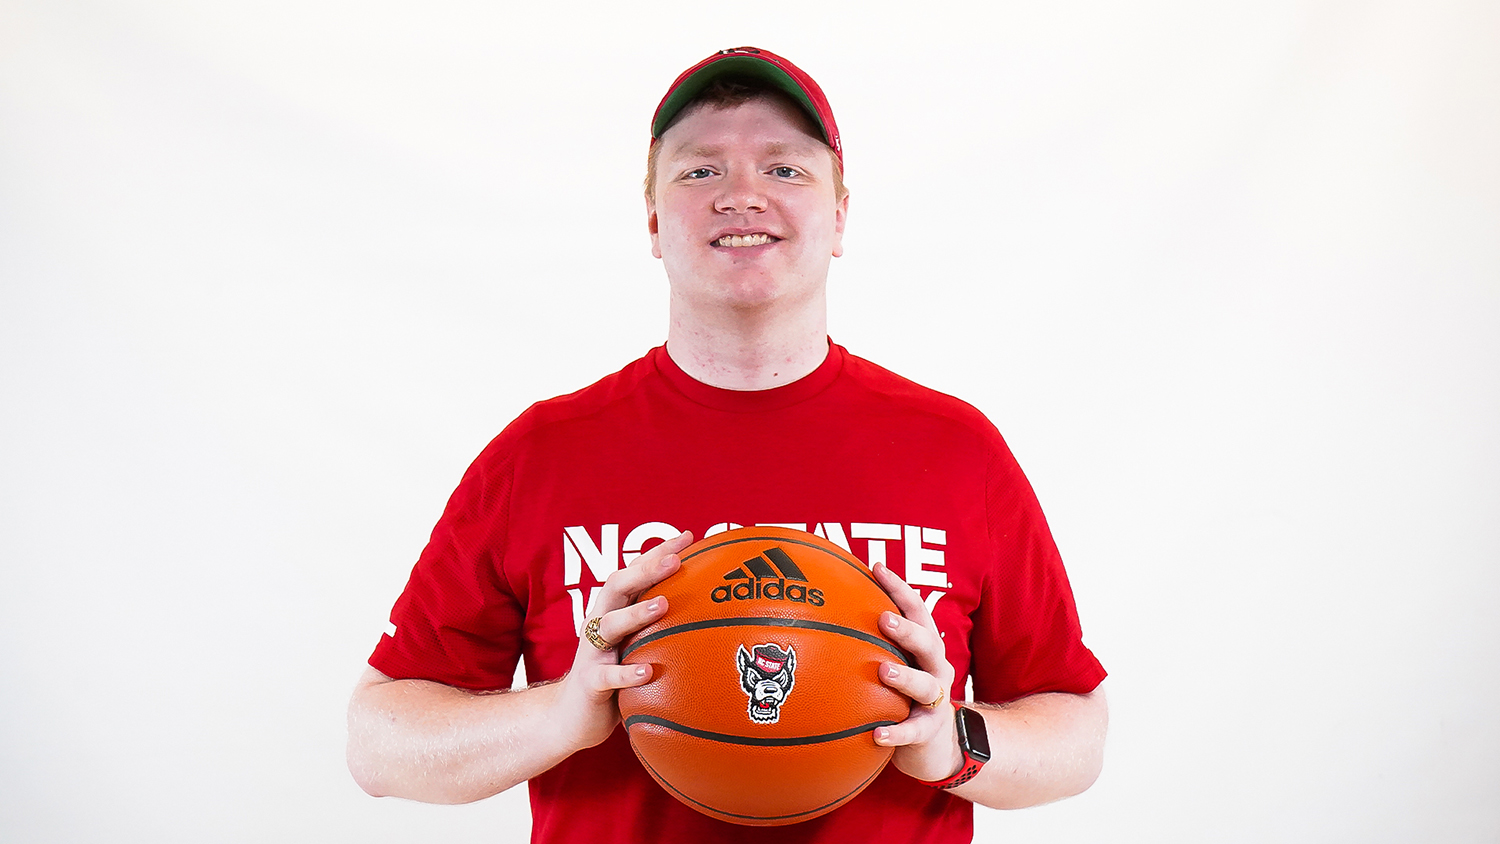 NC State Basketball - Student Spotlight: Jonathan Bentley - Parks, Recreation and Tourism Management at NC State University